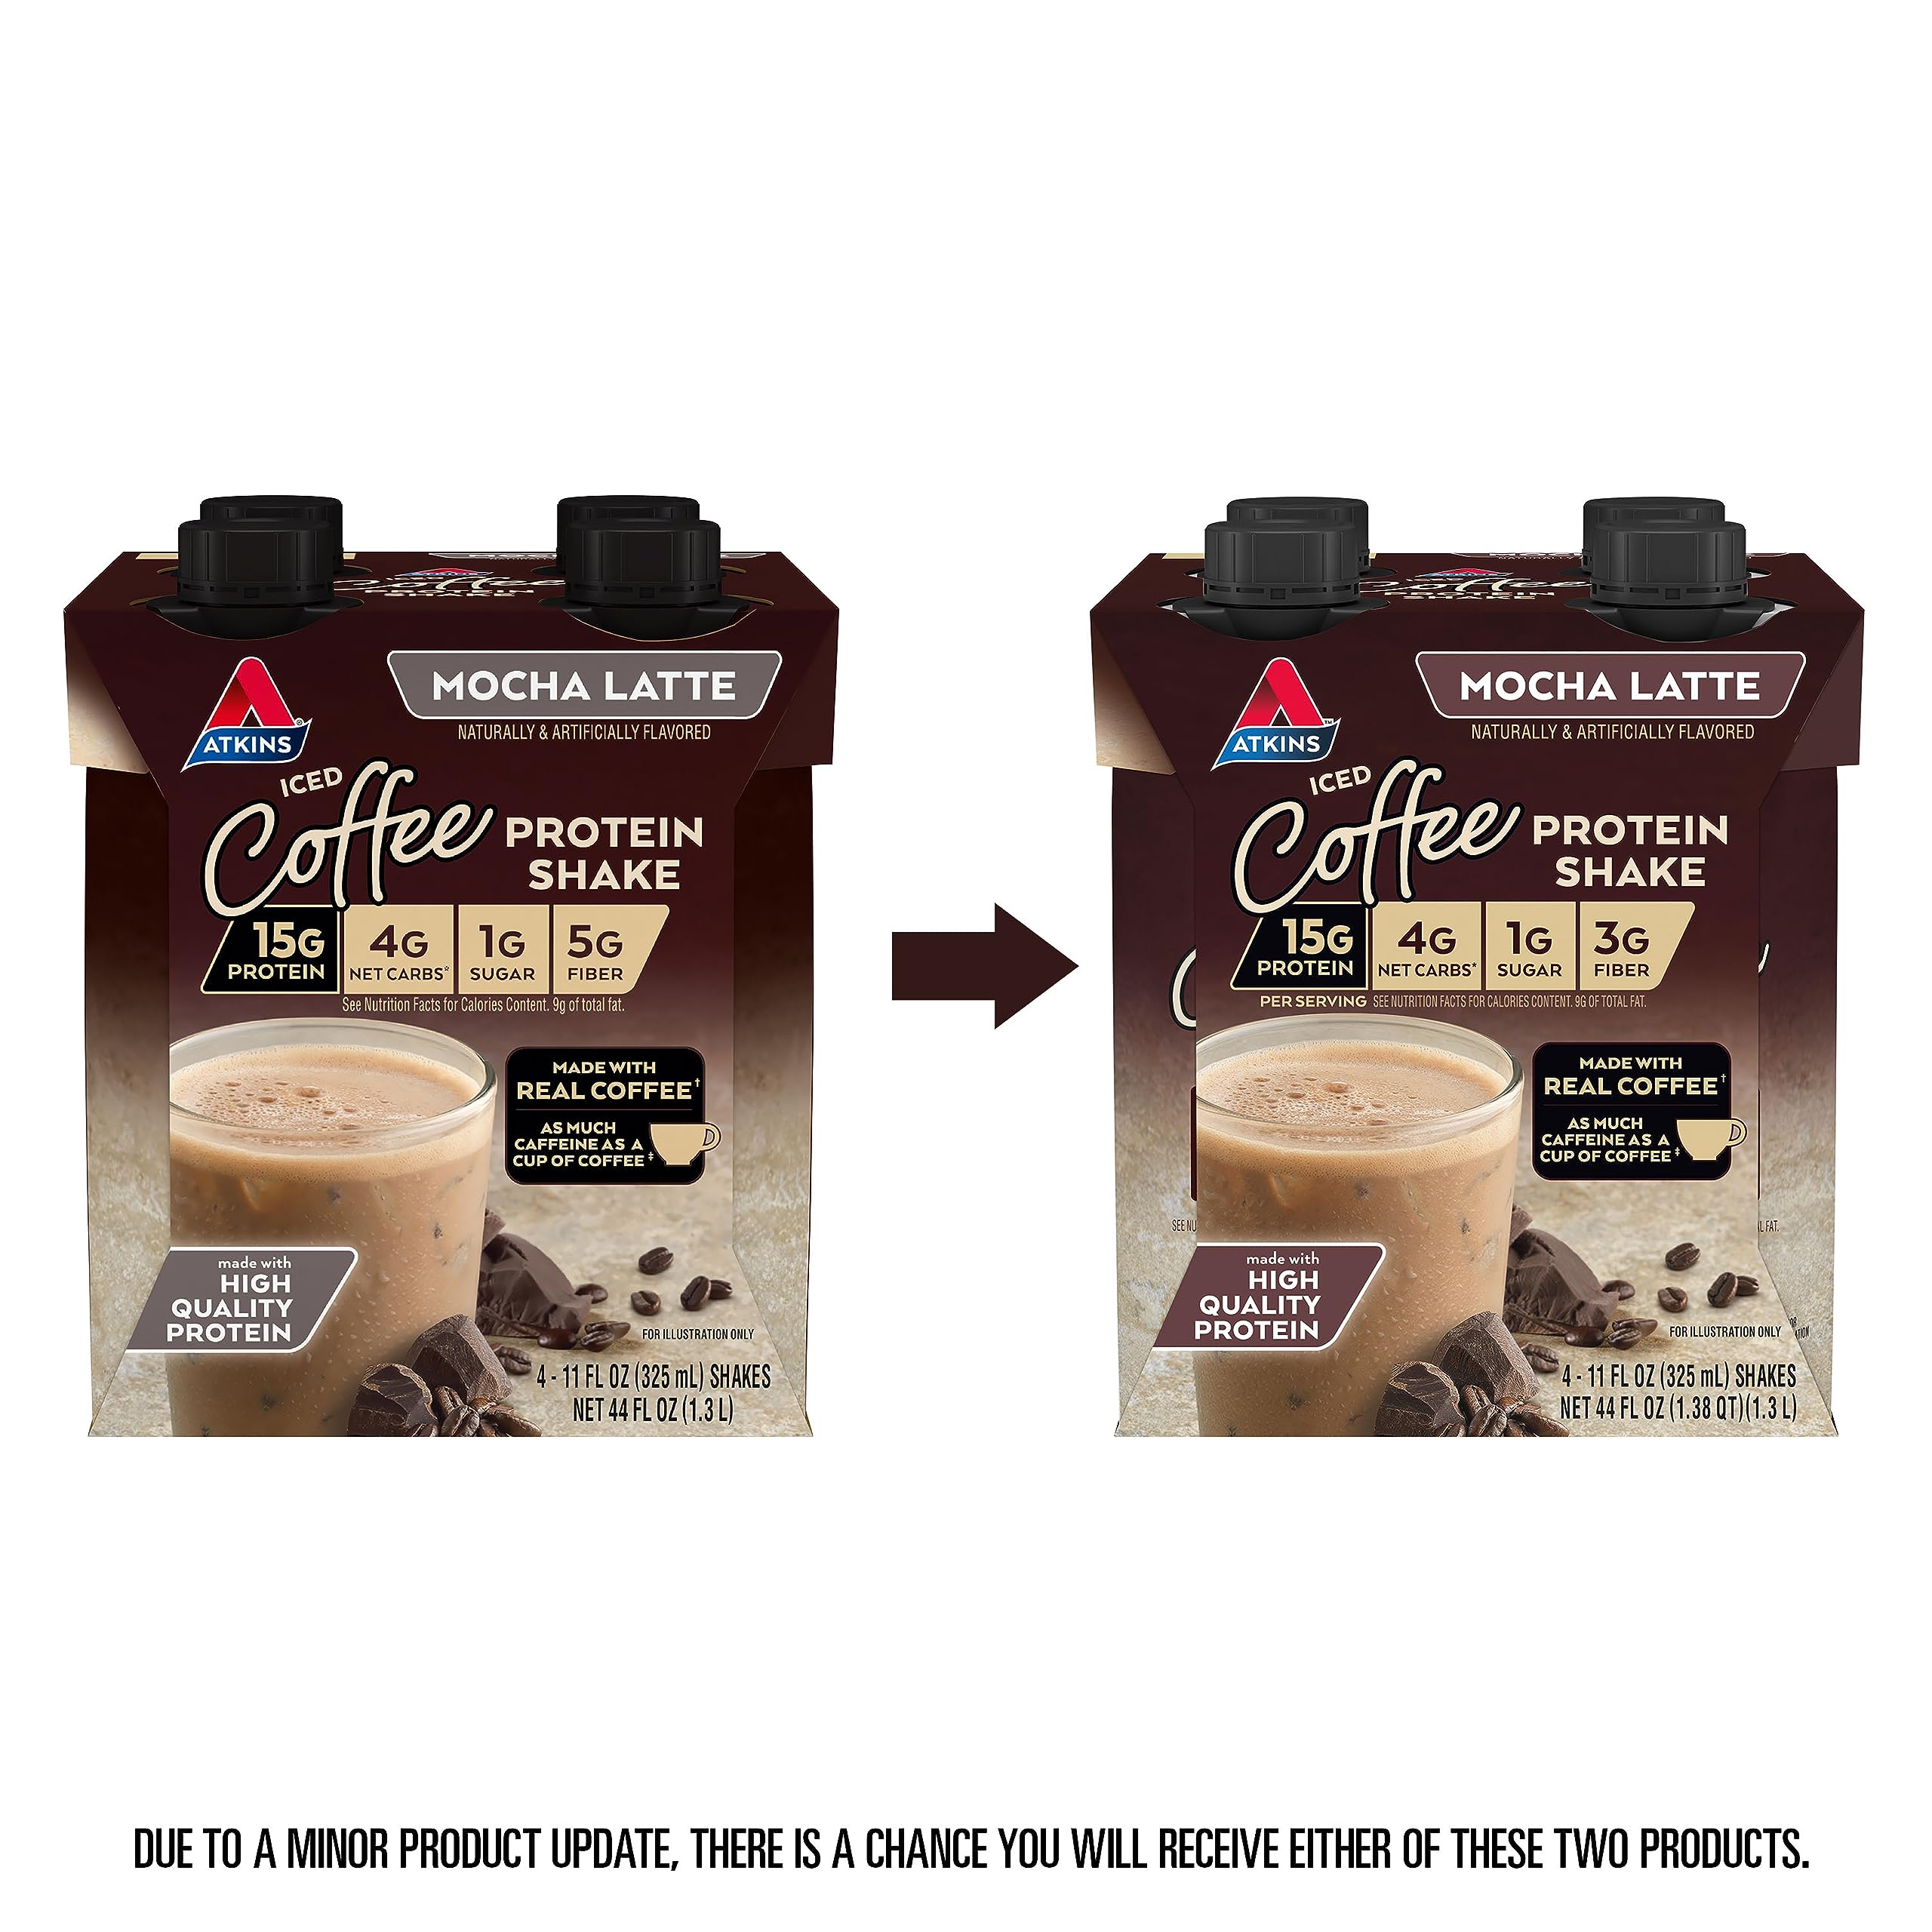 Atkins Iced Coffee Mocha Latte Protein-Rich Shake, with Coffee and Protein, Keto-Friendly and Gluten Free, 11 Fl Oz (Pack of 12) (Packaging May Vary)